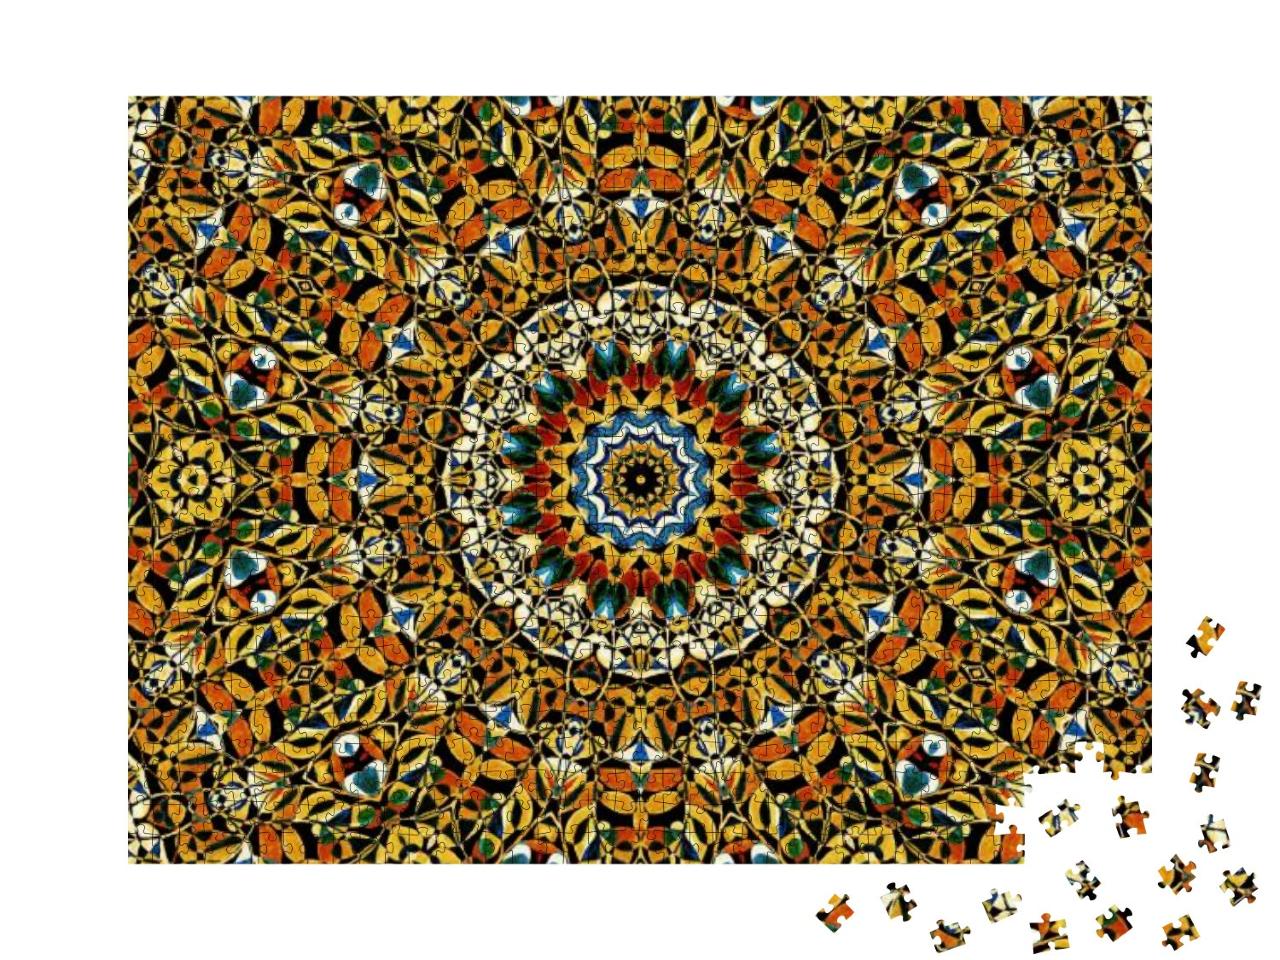 Melting Watercolor Colorful Symmetrical Pattern for Texti... Jigsaw Puzzle with 1000 pieces